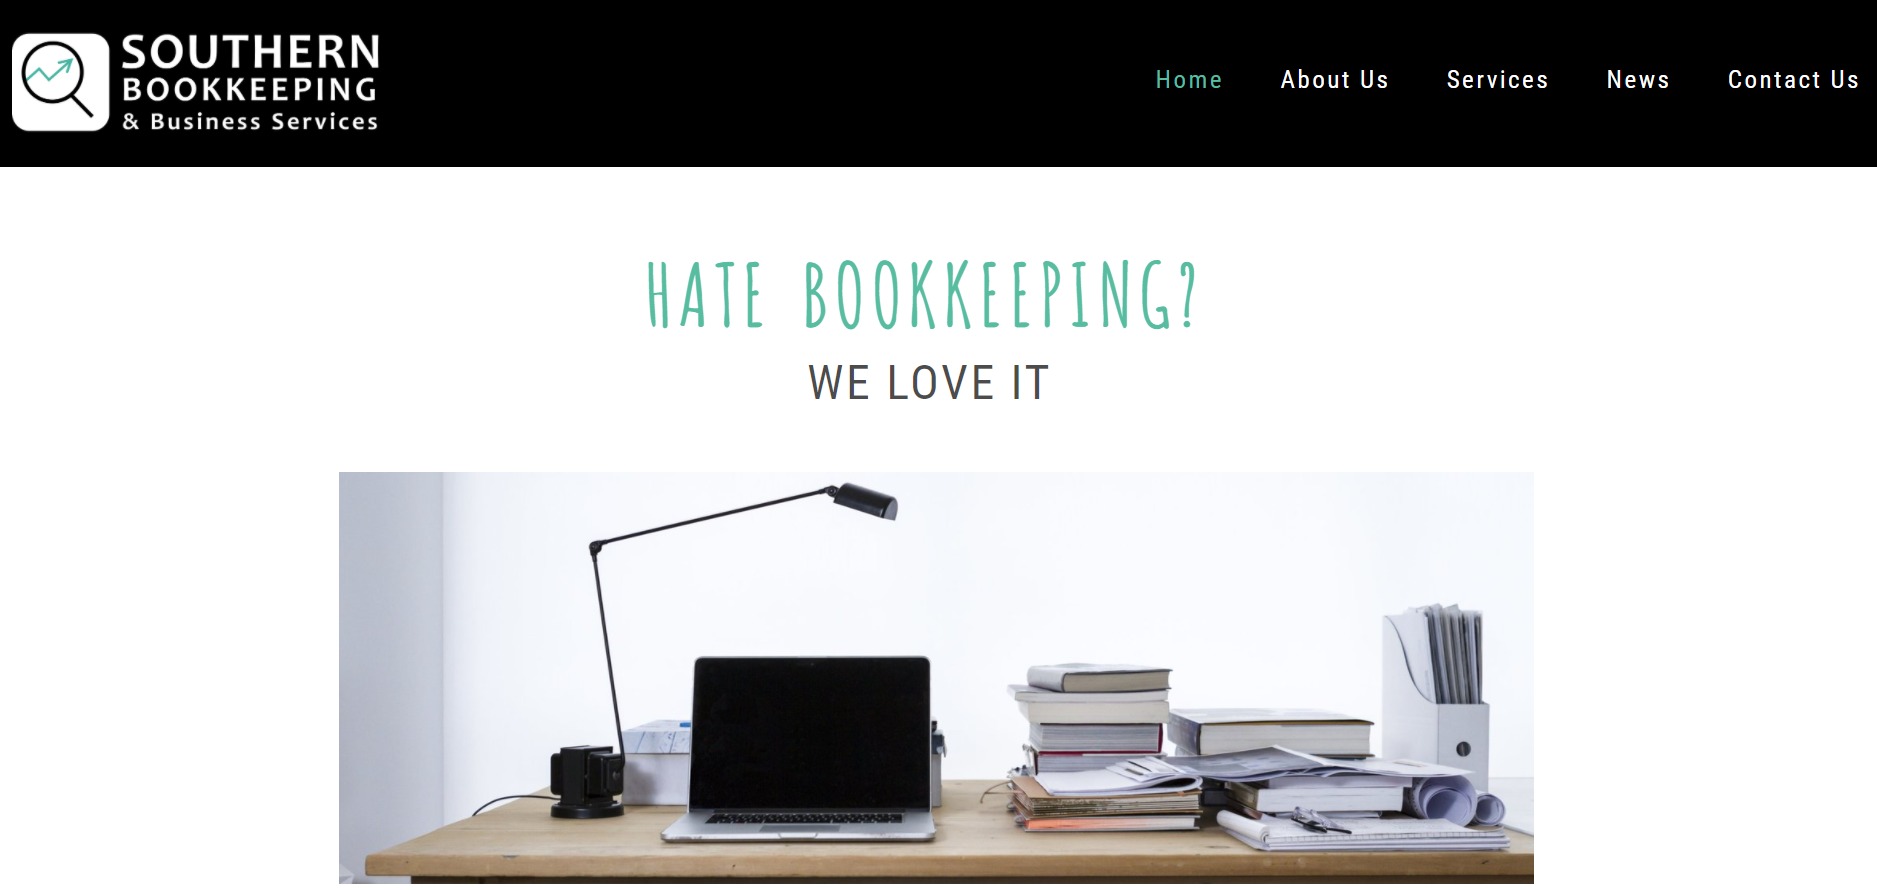 Southern Bookkeeping